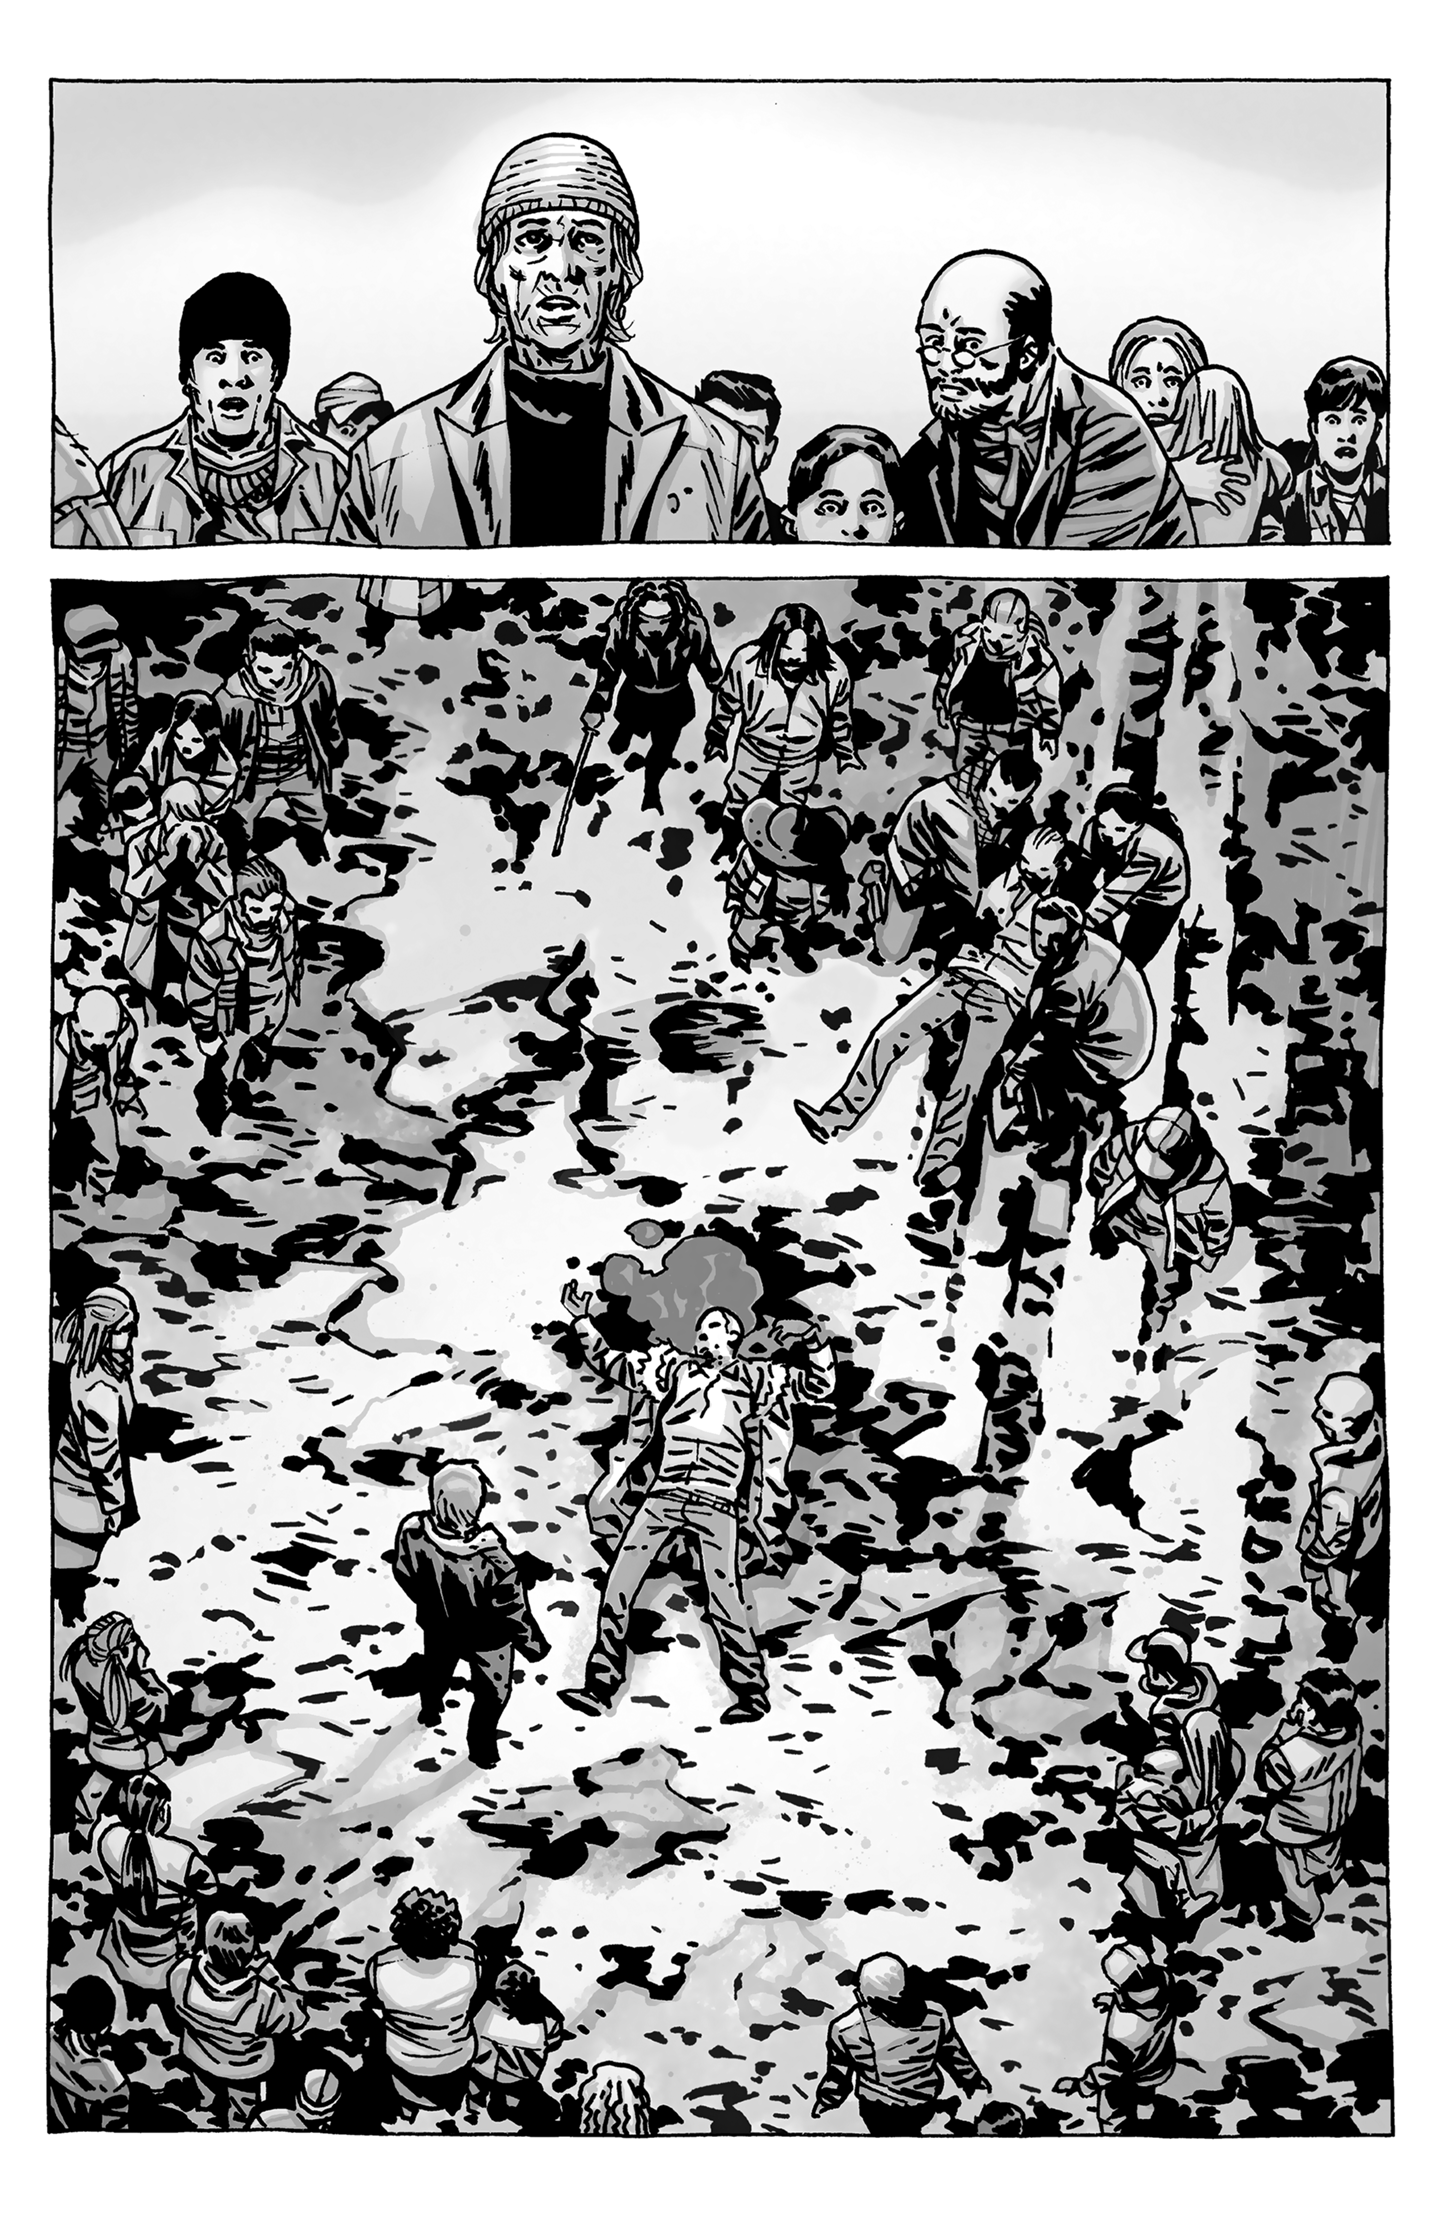 The Walking Dead 95 - A Larger World Part Three